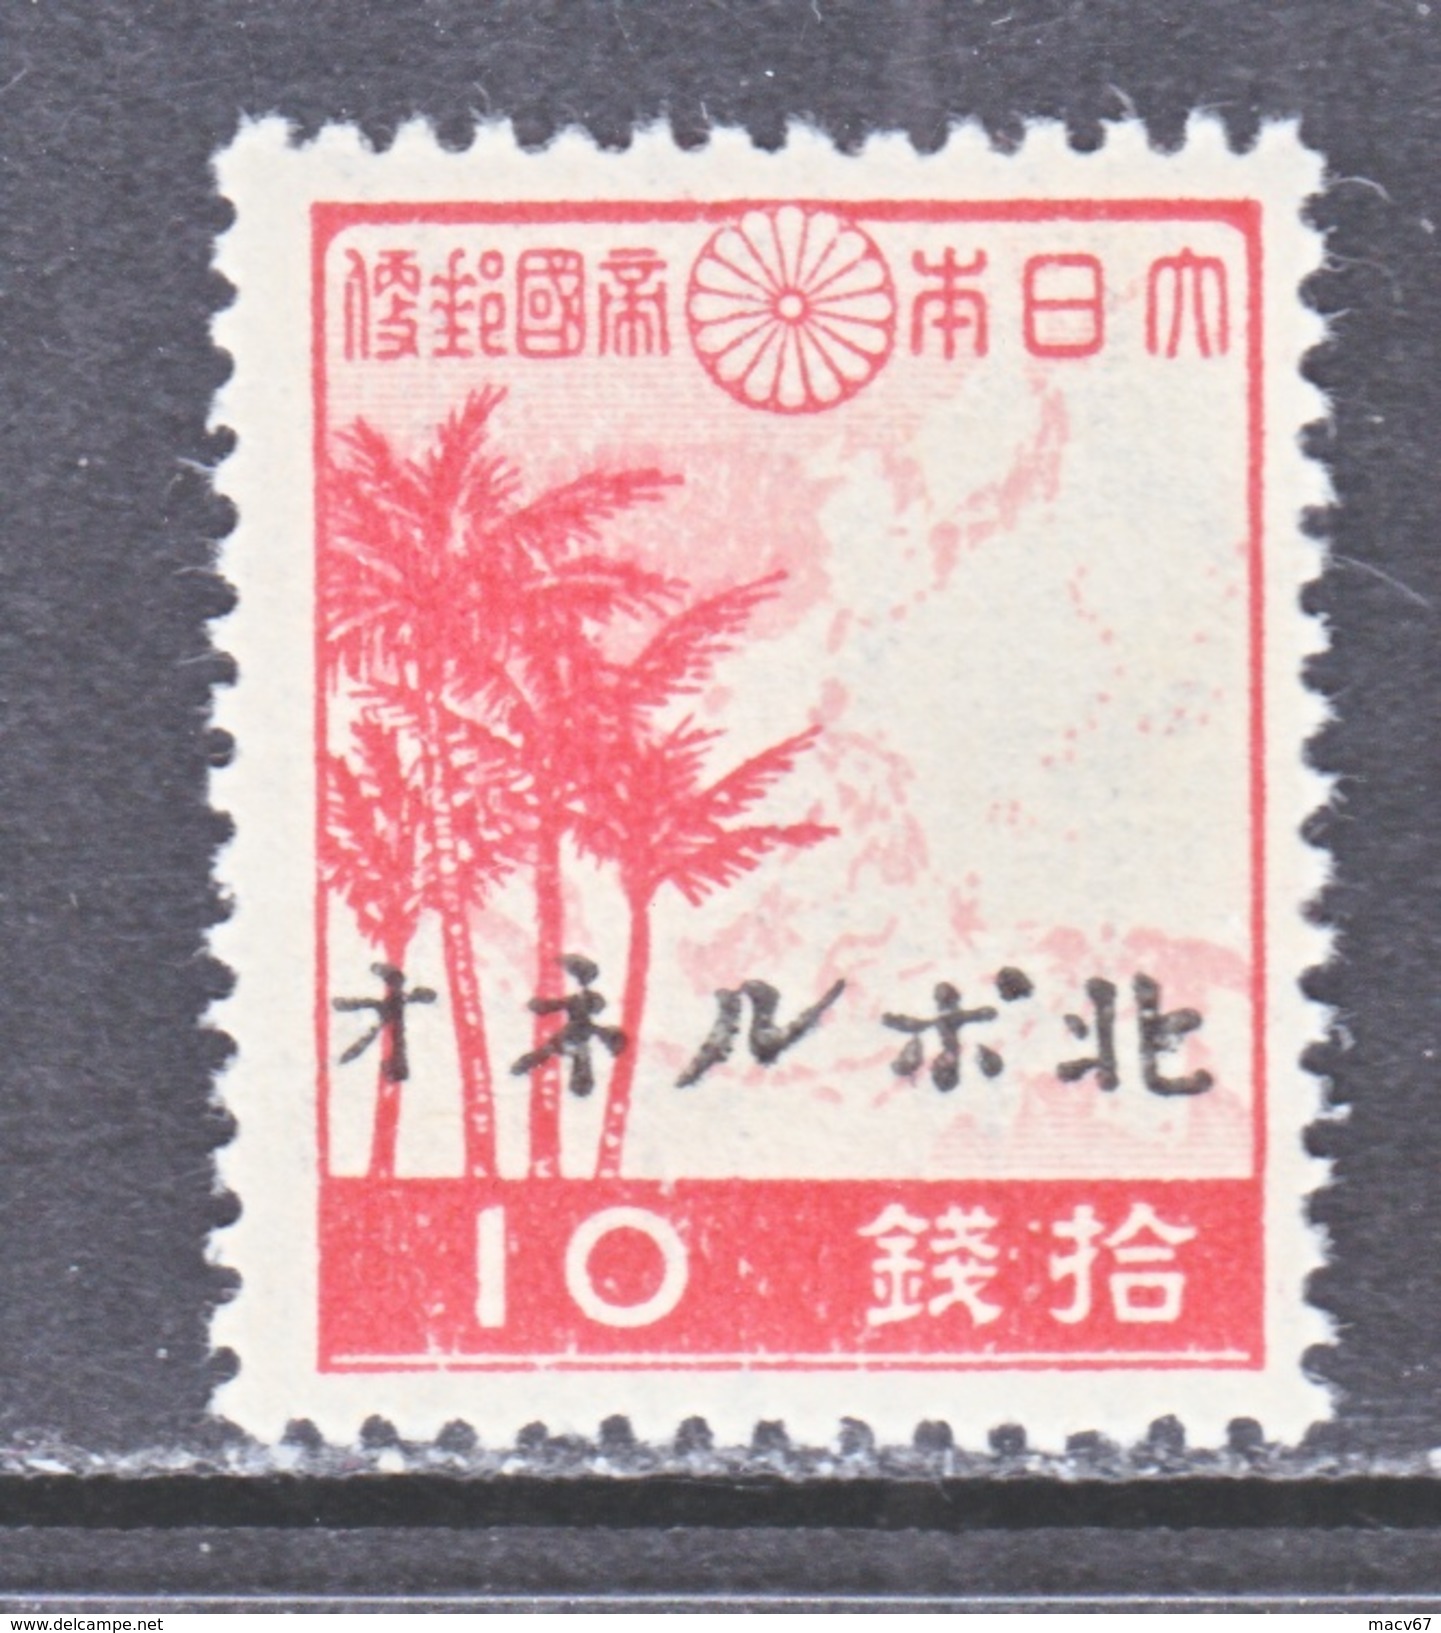 JAPANESE  OCCUP. NORTH  BORNEO  N 41   ** - Japanese Occupation